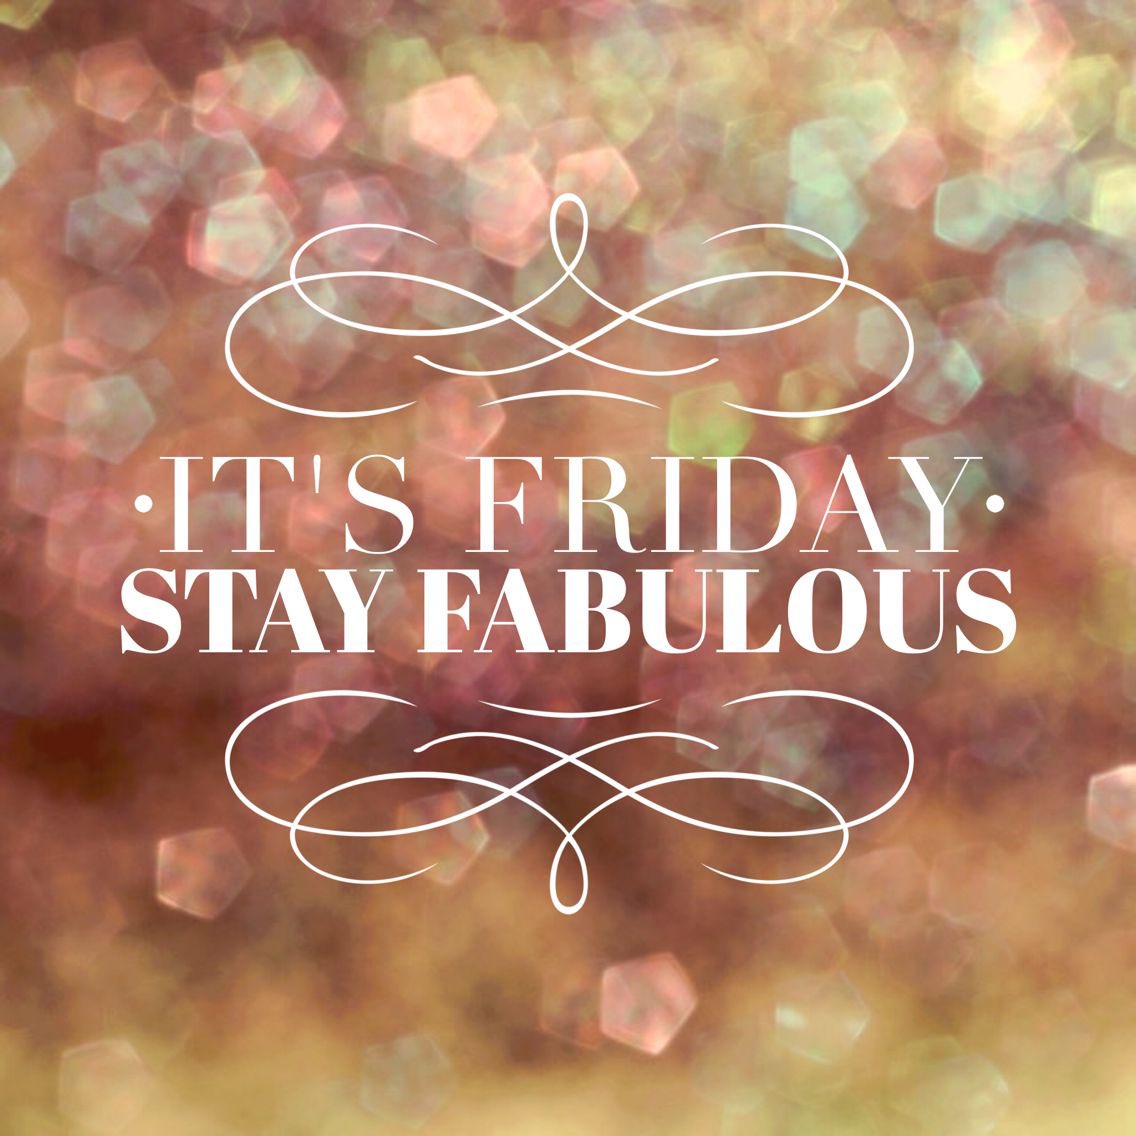 #FF #FridayFeeling #Friday #ItsFriday #StayFabulous #Weekend #March #Spring 
👍